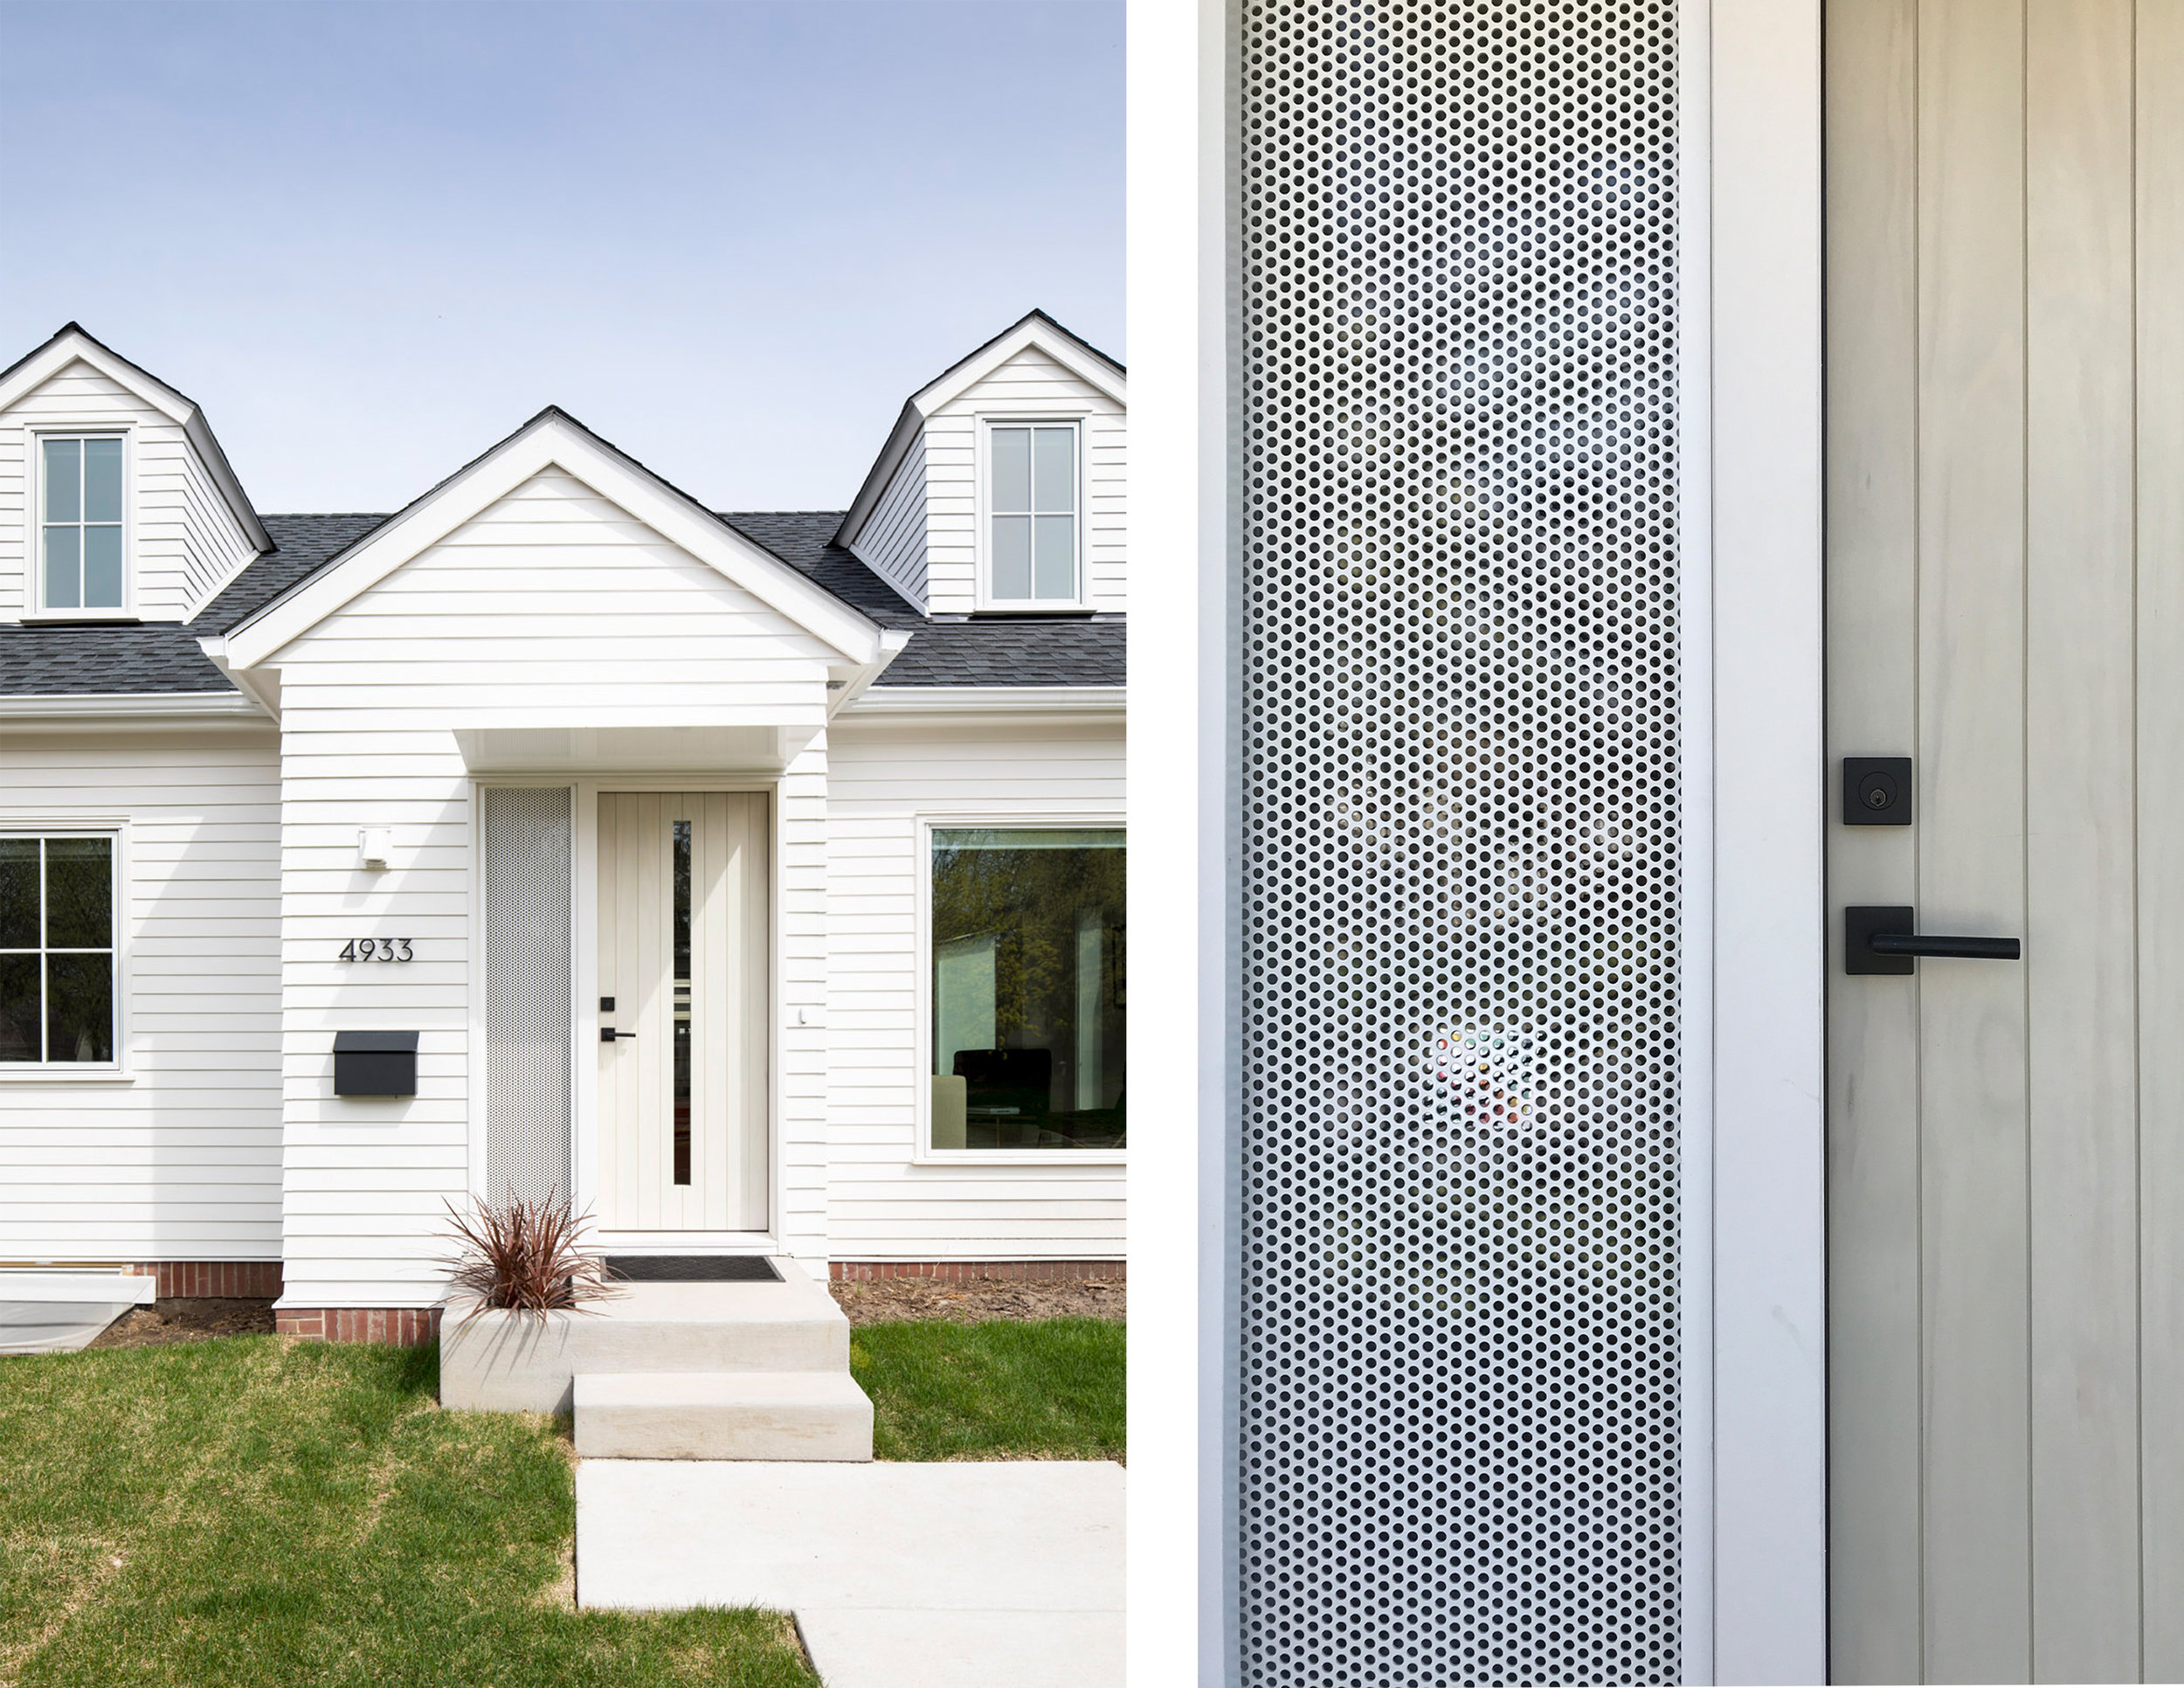 A modern white home with custom privacy screen detail at front door